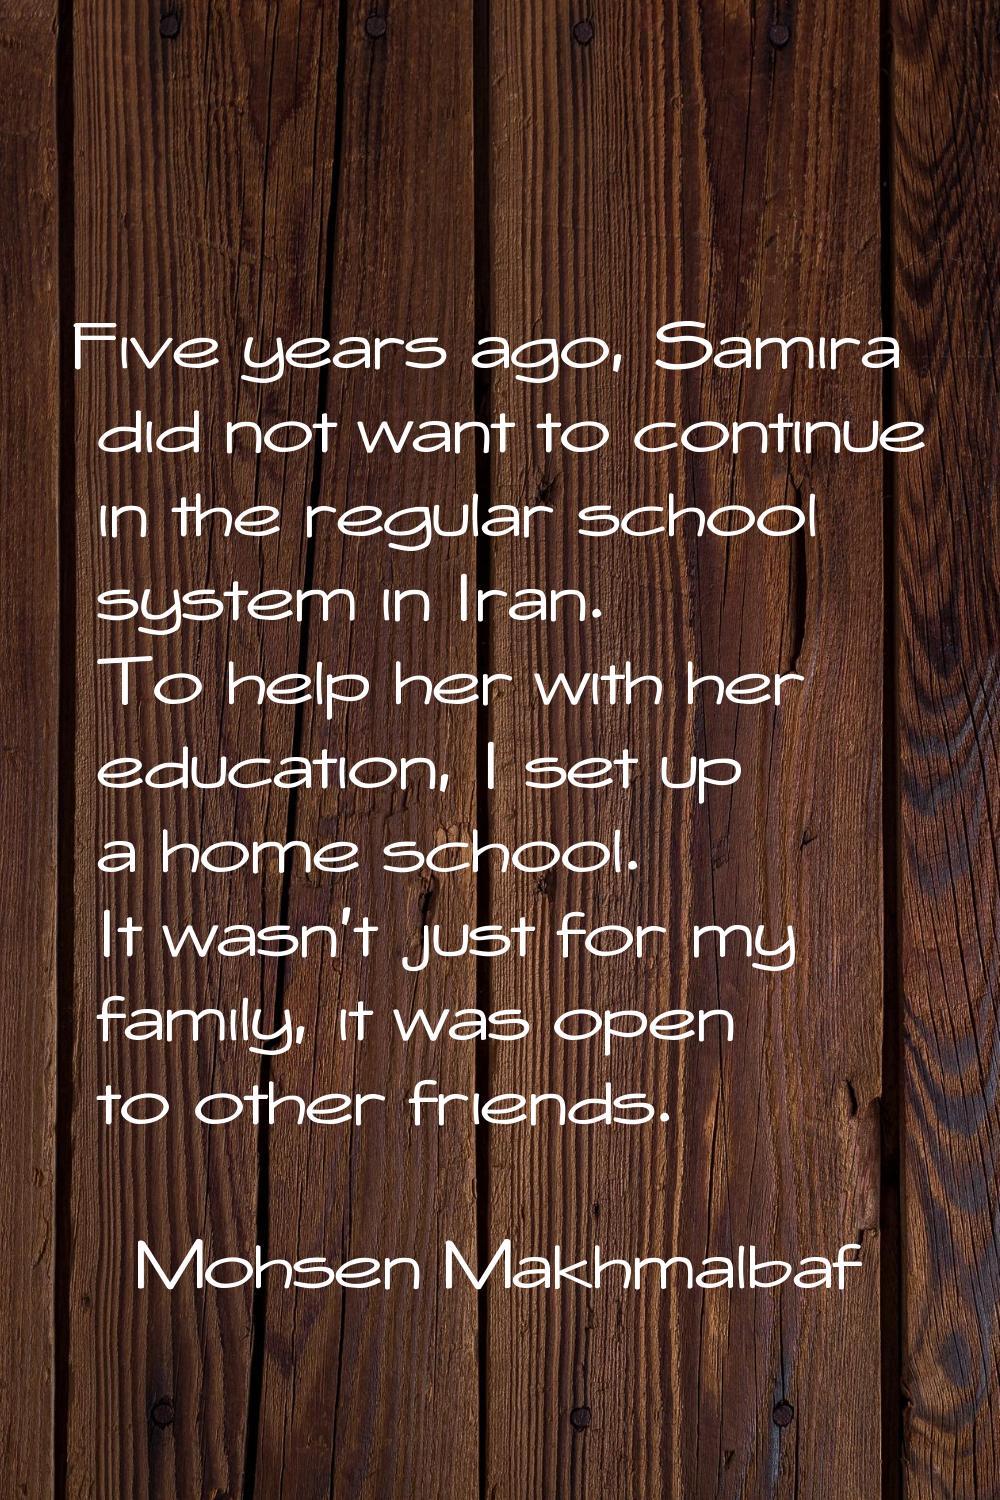 Five years ago, Samira did not want to continue in the regular school system in Iran. To help her w